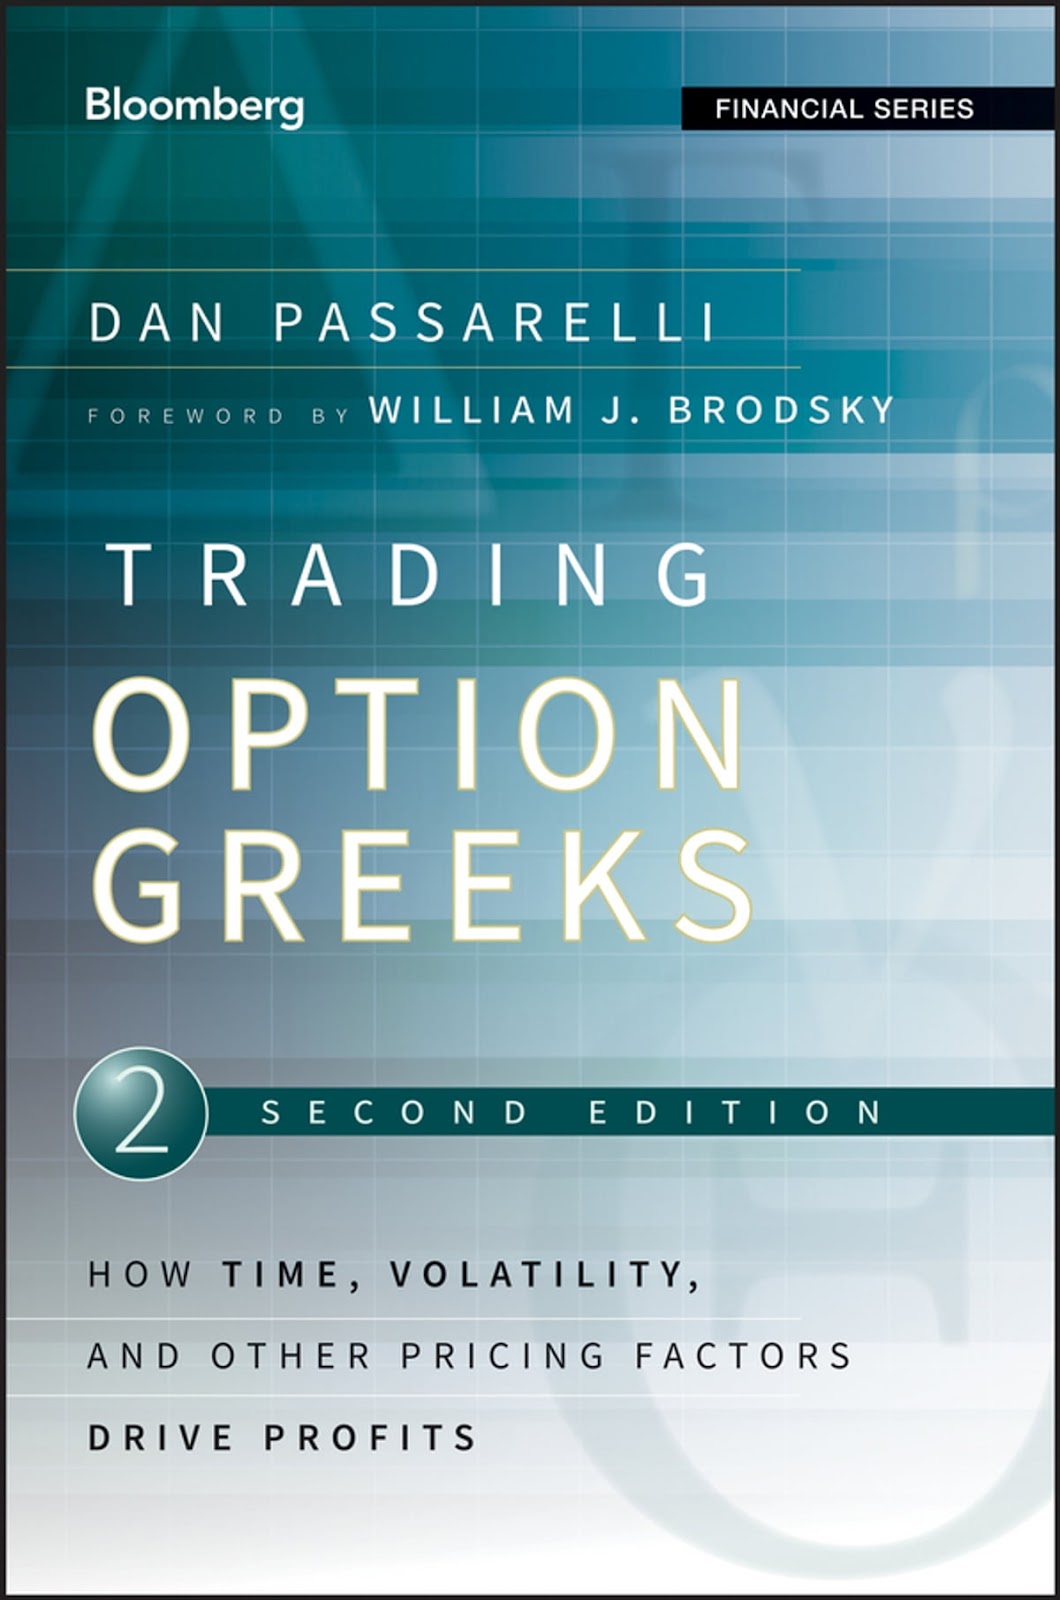 best options trading books, options trading books, option trading books, option trading, option strategy books, option books, follow the smart money book, follow the smart money, best options trading book, best option book, 